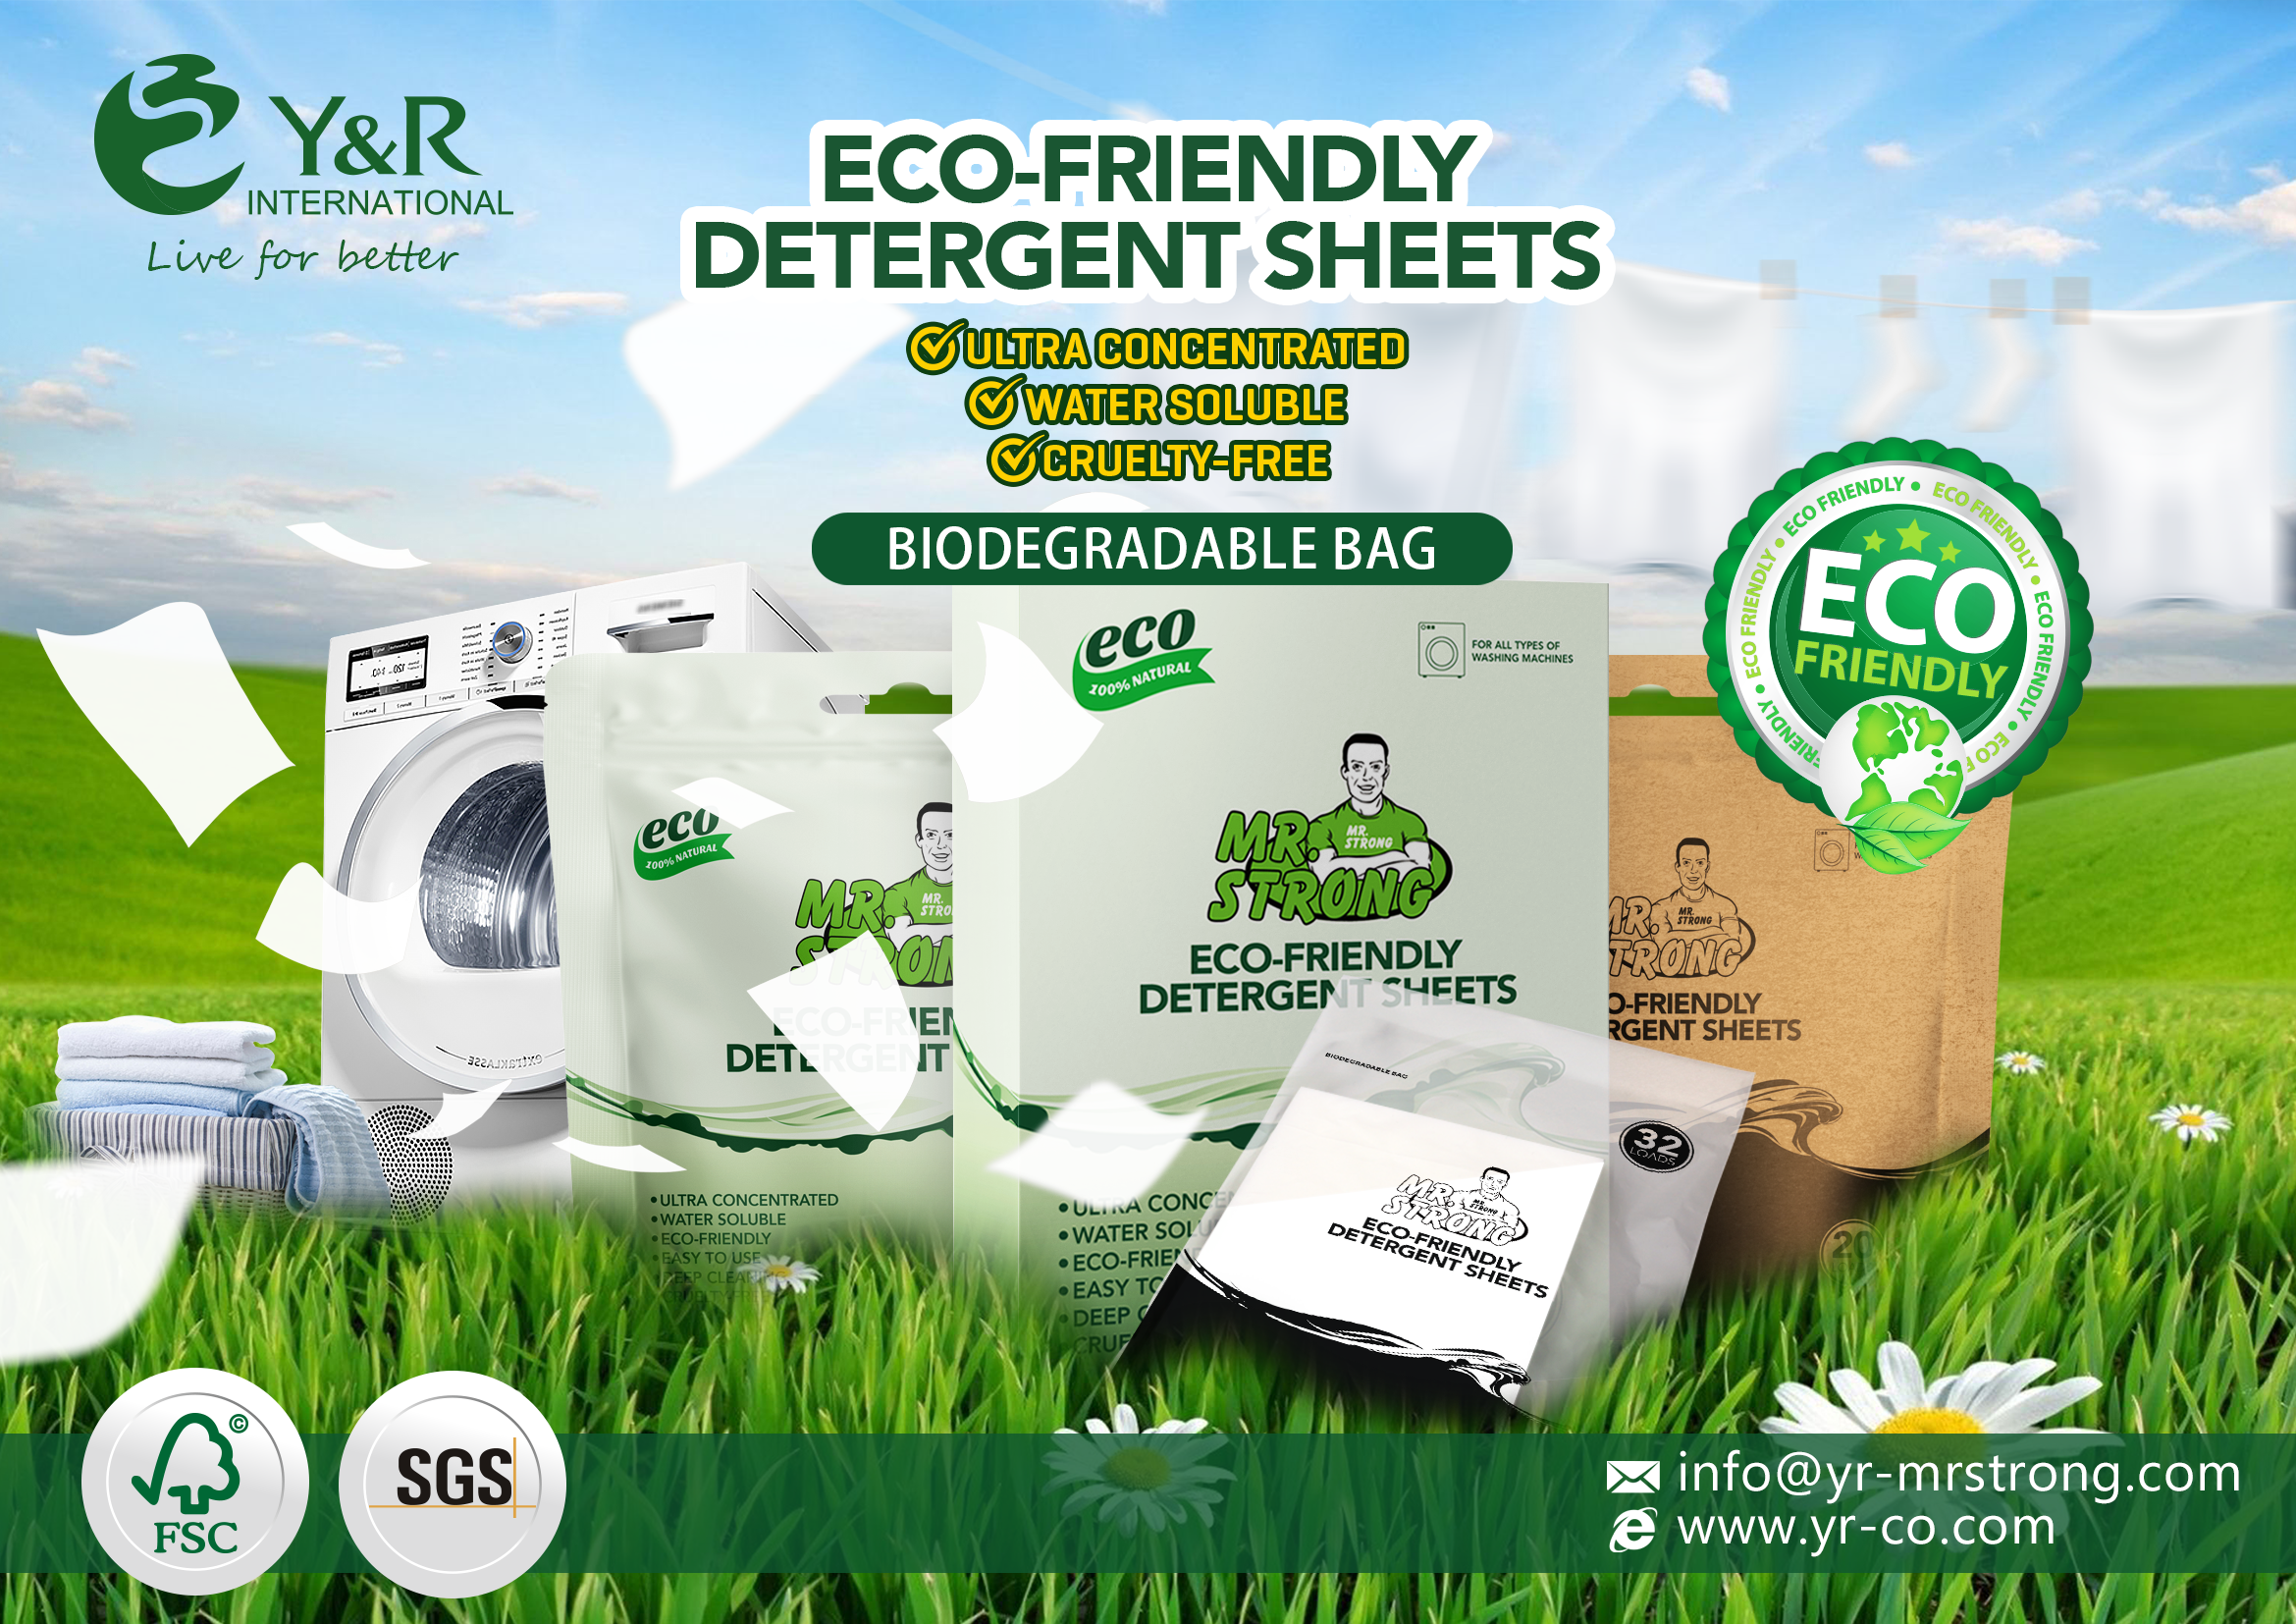 The Best Selling Eco-friendly Laundry Sheets